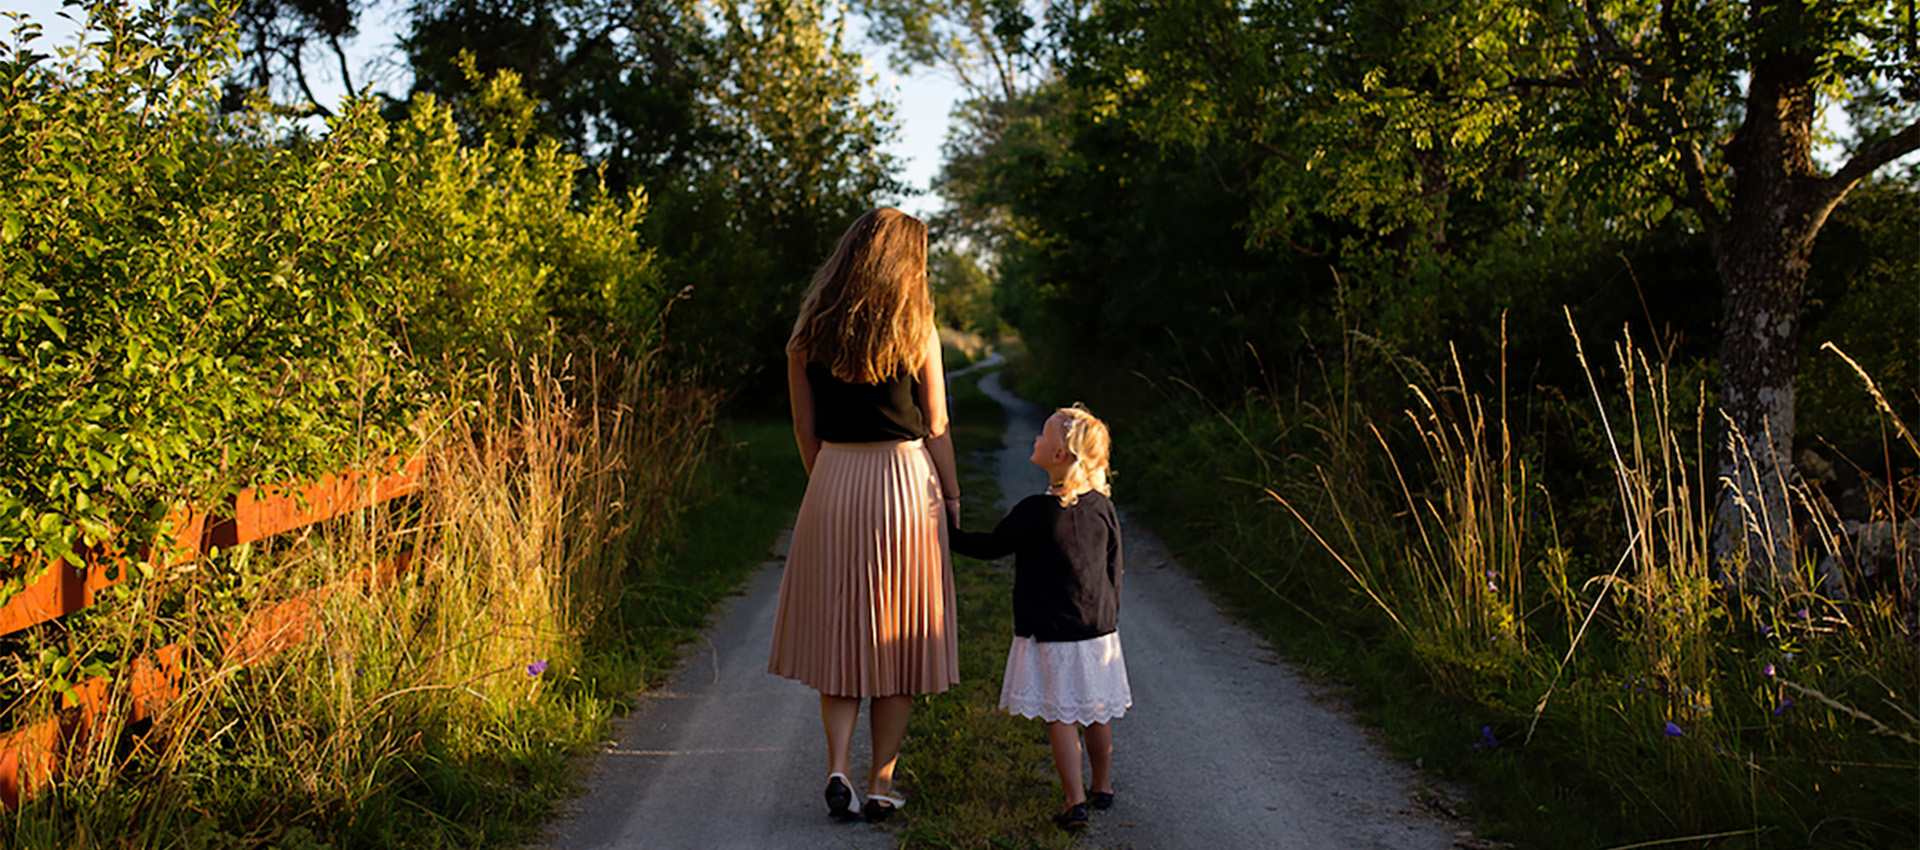 Image of two girls standing on a dirt path surrounded by trees